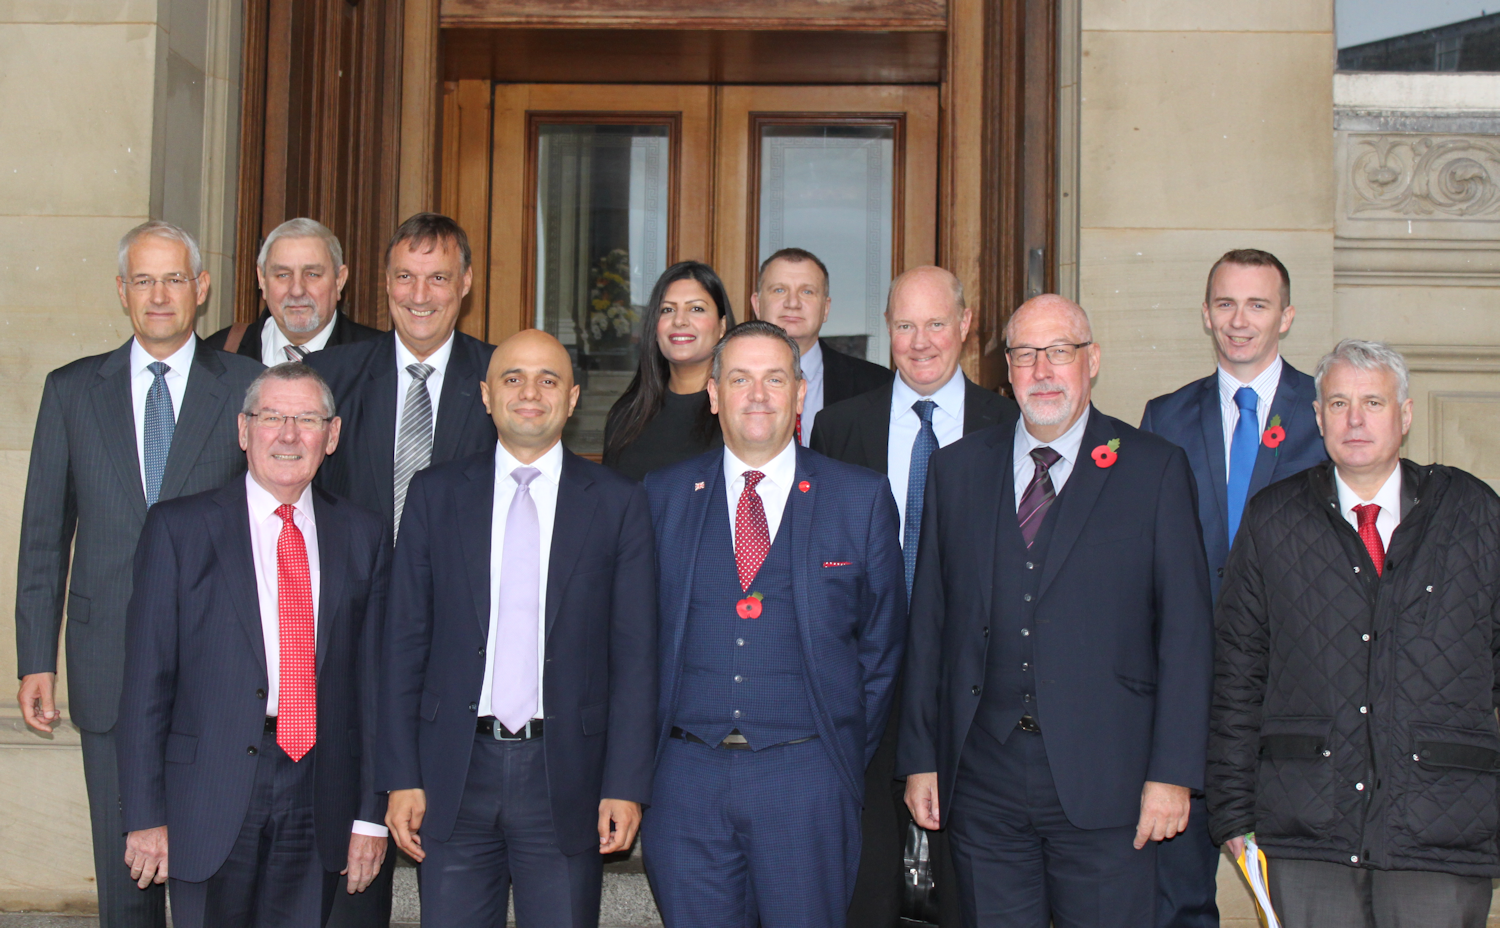 Secretary of State for Communities & Local Government Sajid Javid met the WMCA Board to discuss devolution